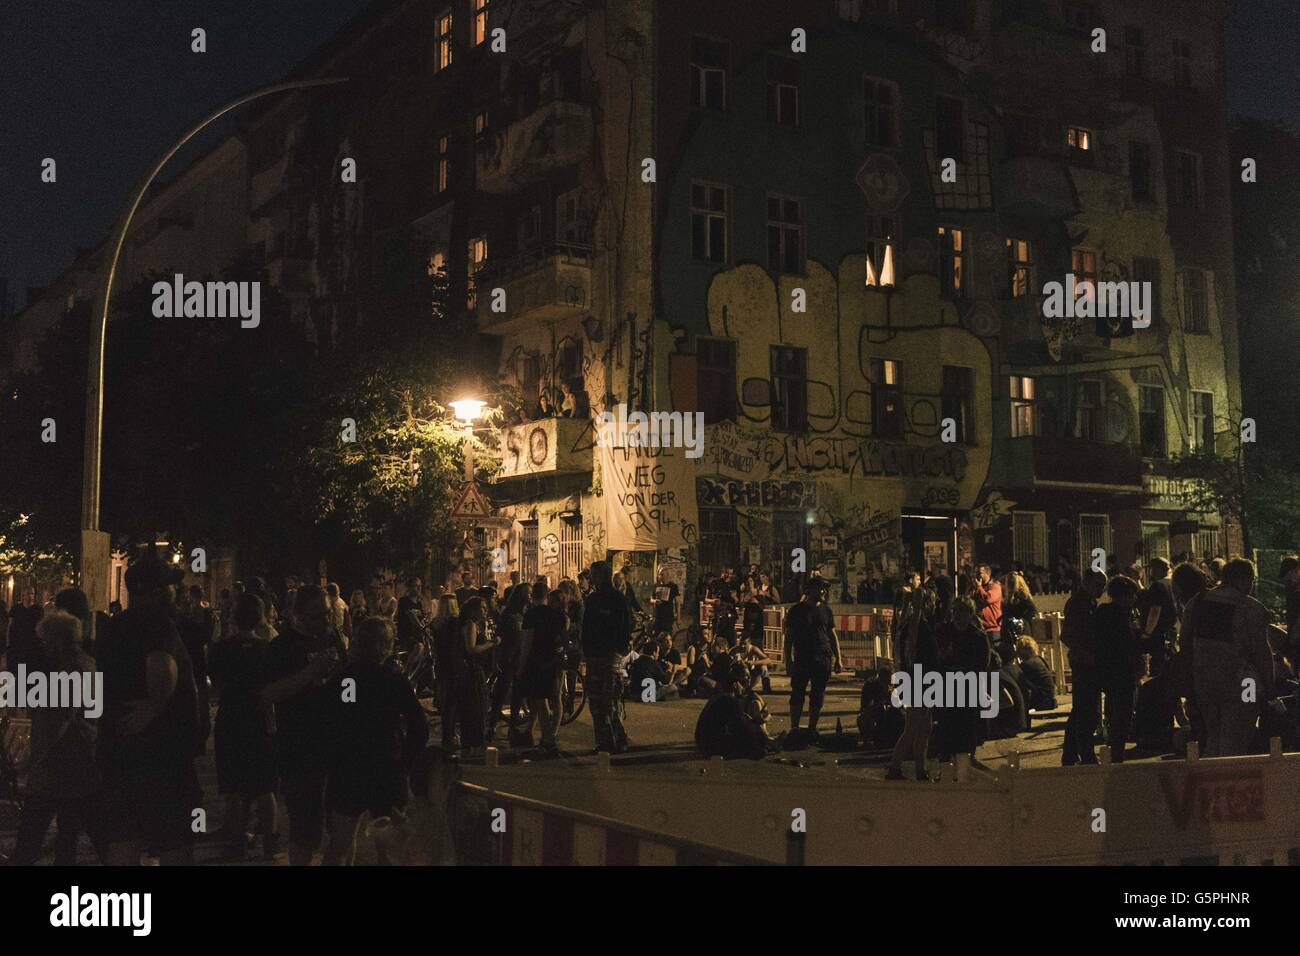 Berlin, Berlin, Germany. 22nd June, 2016. Activists gather in front of a squat after the partially eviction of the left wing housing project in the Rigaer Street 94 in Berlin Friedrichshain. © Jan Scheunert/ZUMA Wire/Alamy Live News Stock Photo